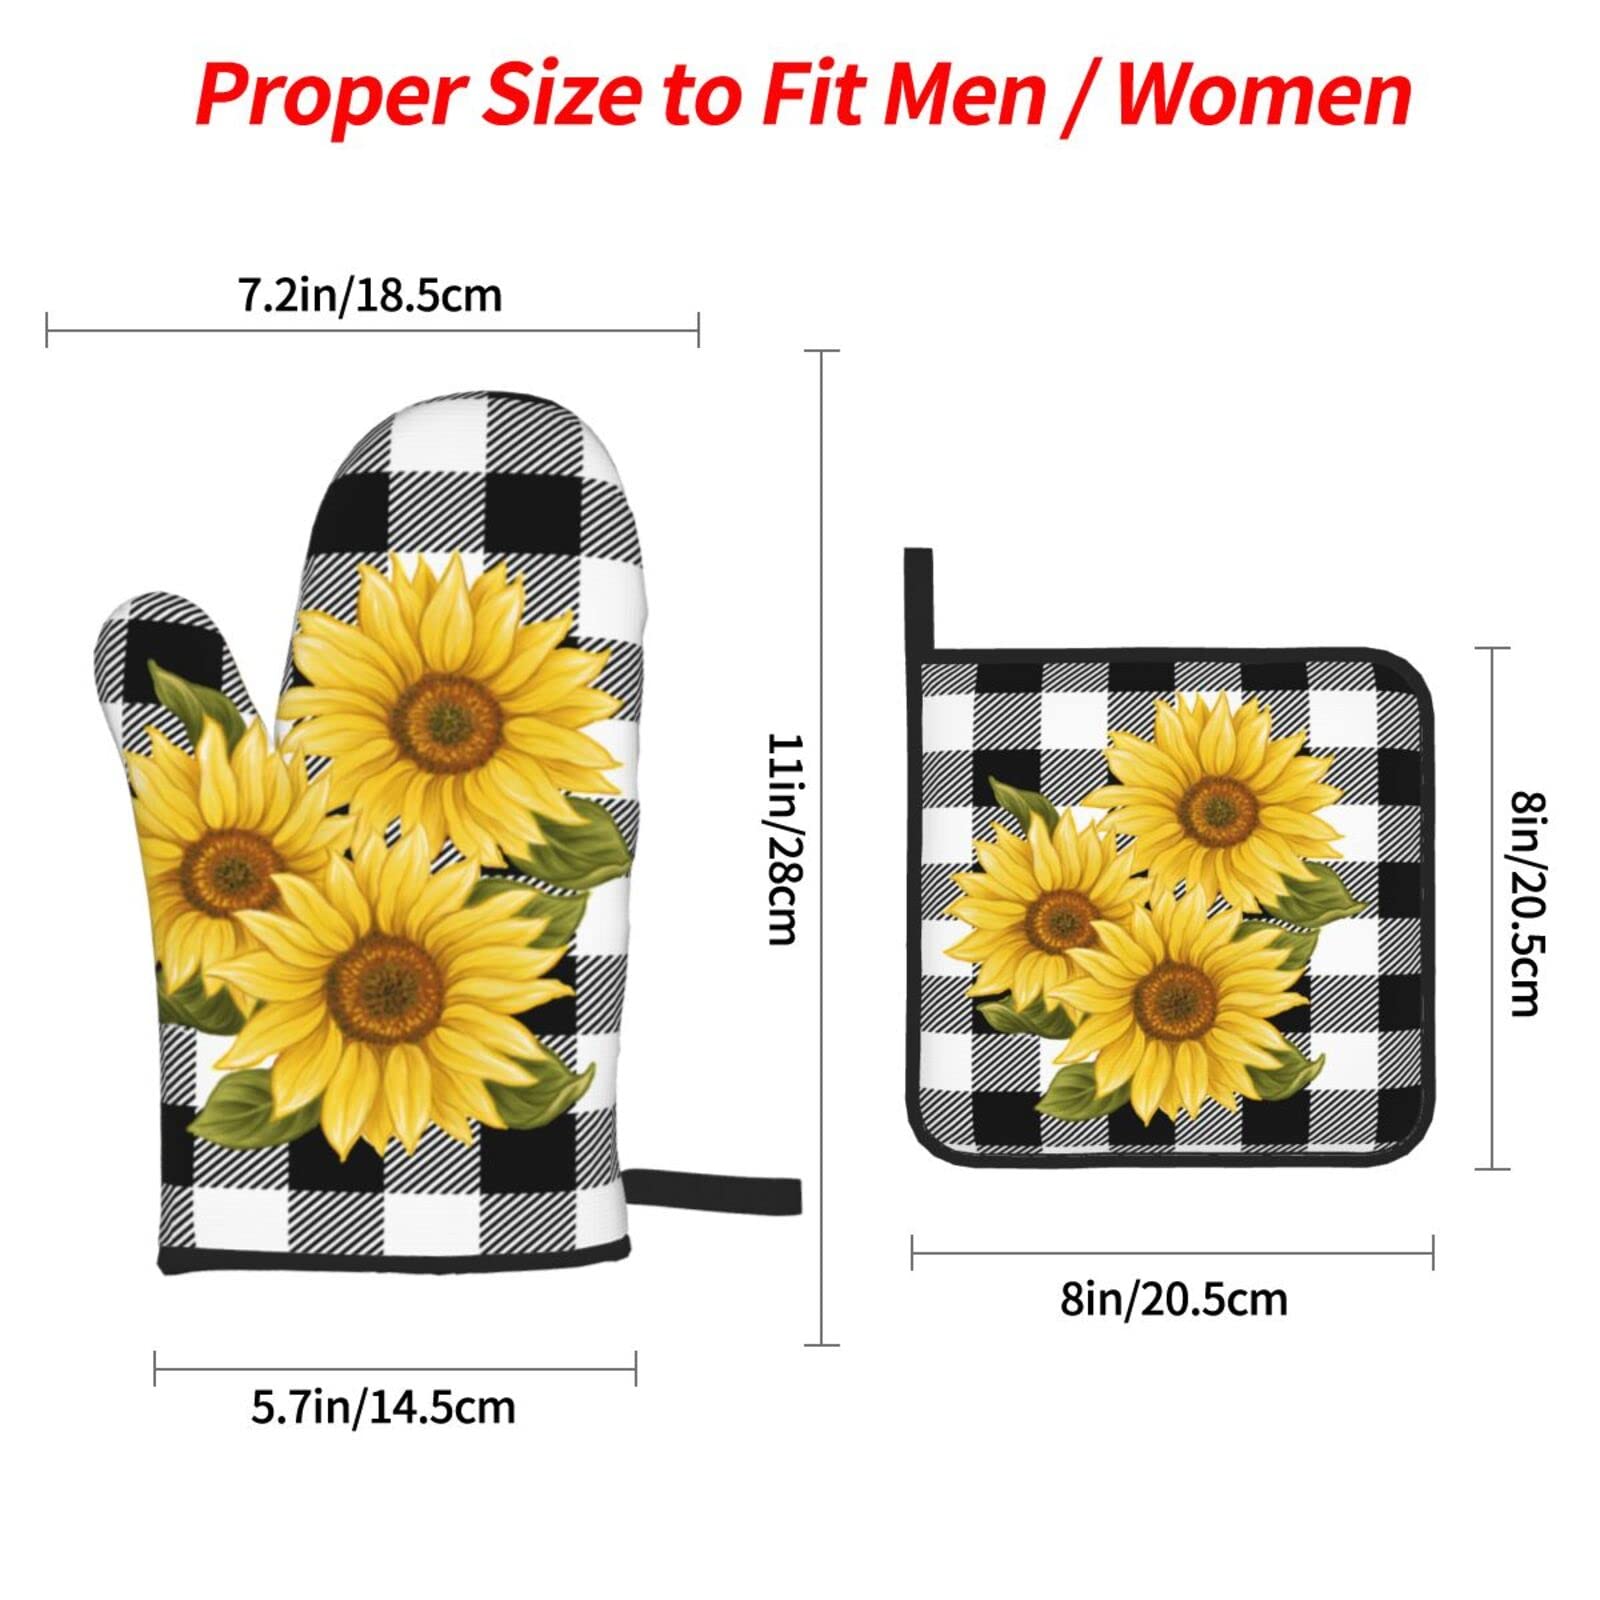 Sunflower Black White Buffalo Plaid Oven Mitts and Pot Holders Sets of 4 High Heat Resistant Yellow Floral Lumberjack Check Oven Mitts with Oven Gloves and Hot Pads Non-Slip Potholders for Kitchen BBQ